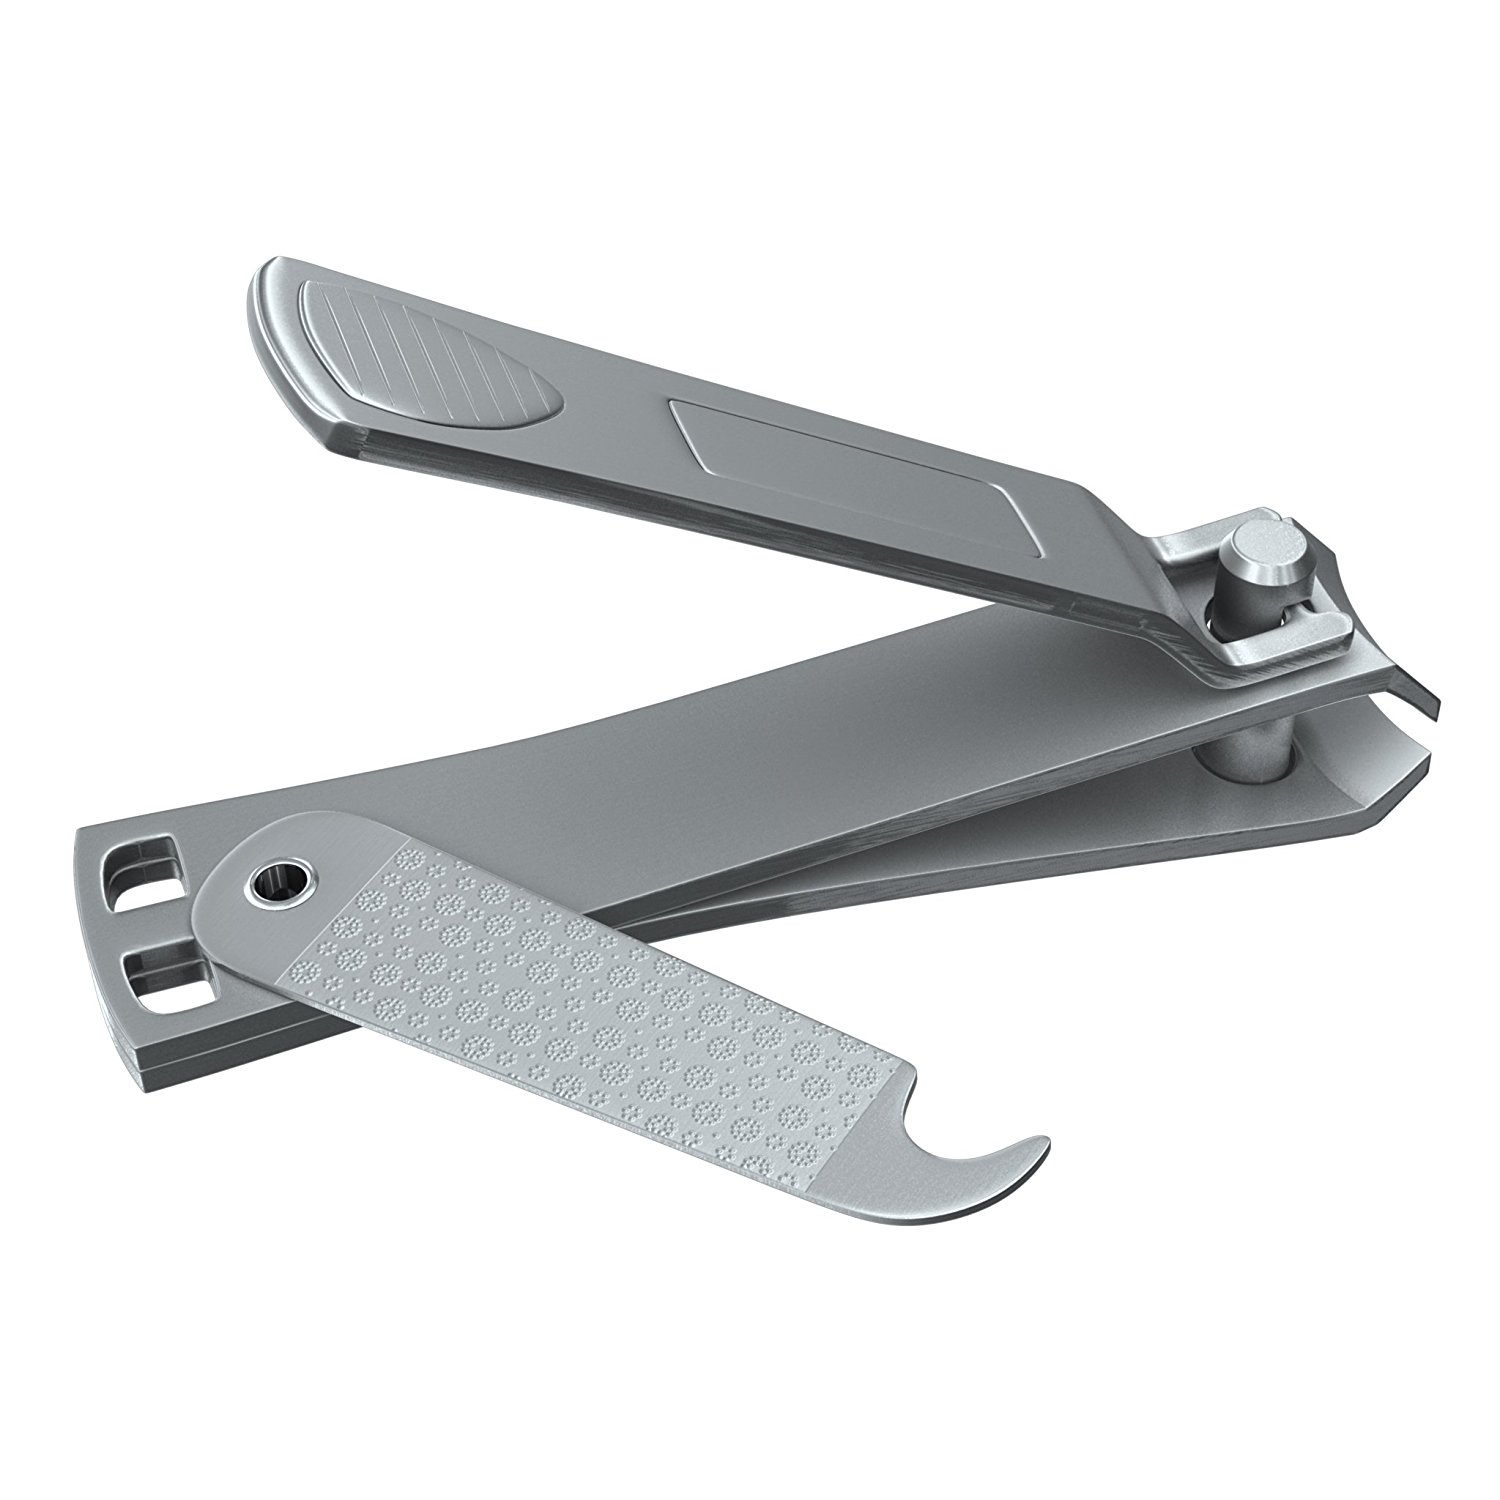 Amazon.com : Nail Clippers For Fingernails By Clyppi - Swing Out ...